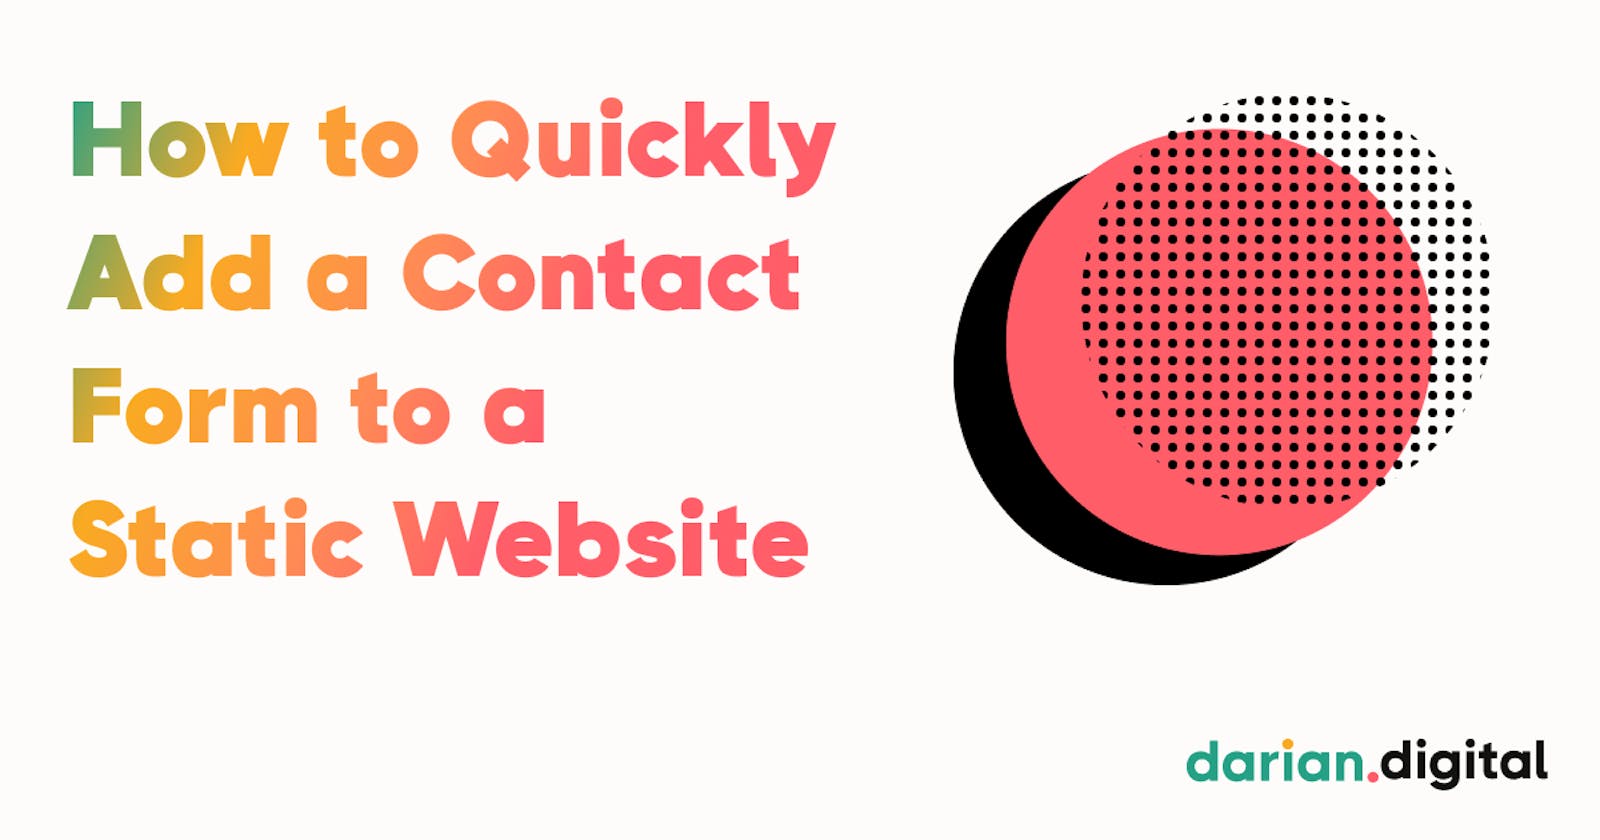 How to Quickly Add a Contact Form to a Static Website